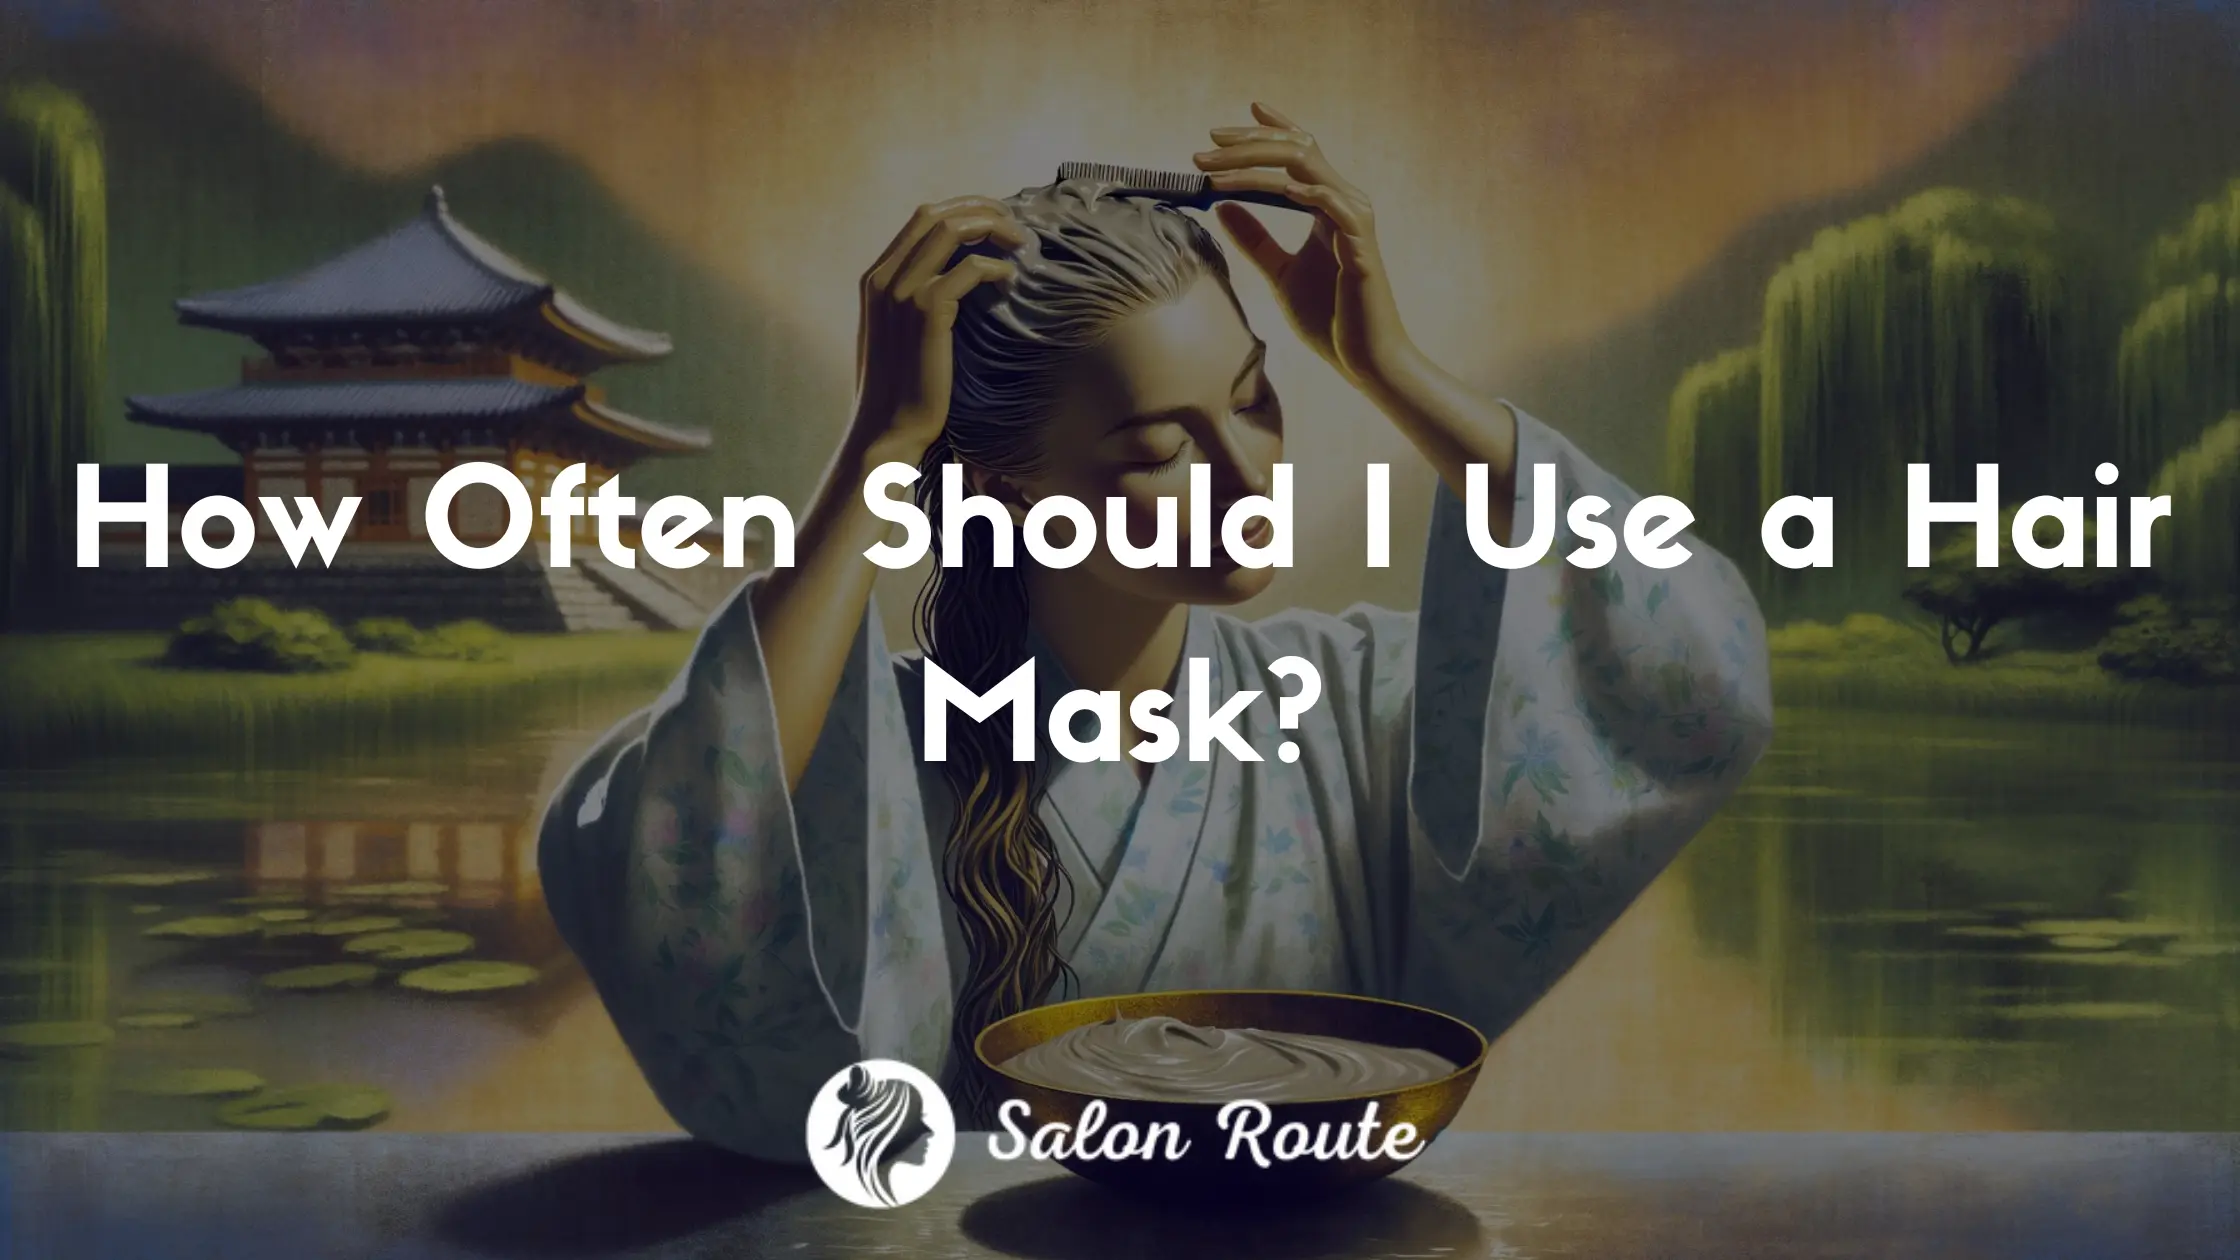 How Often Should I Use a Hair Mask?